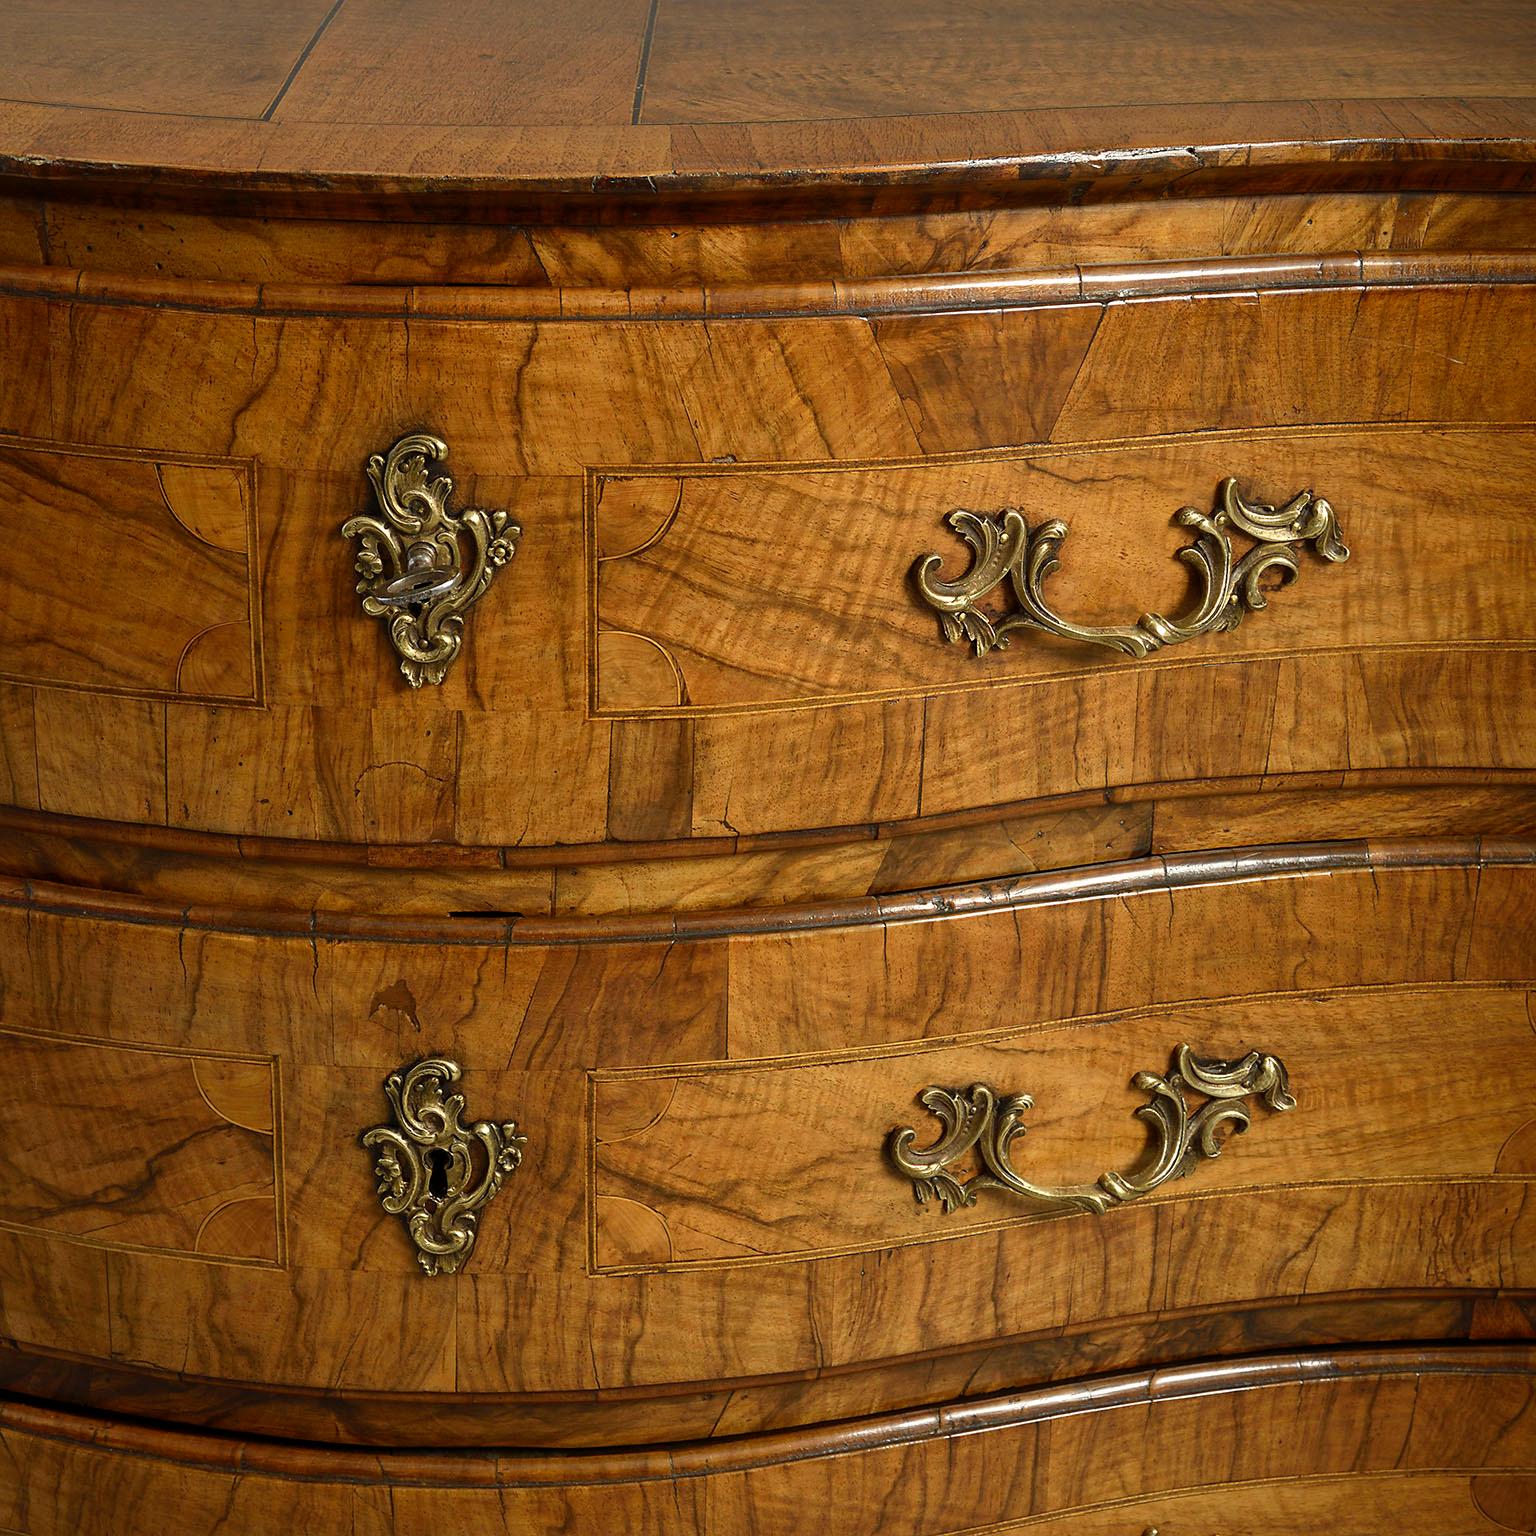 Hand-Carved 18th Century Burr Walnut and Inlaid Commode